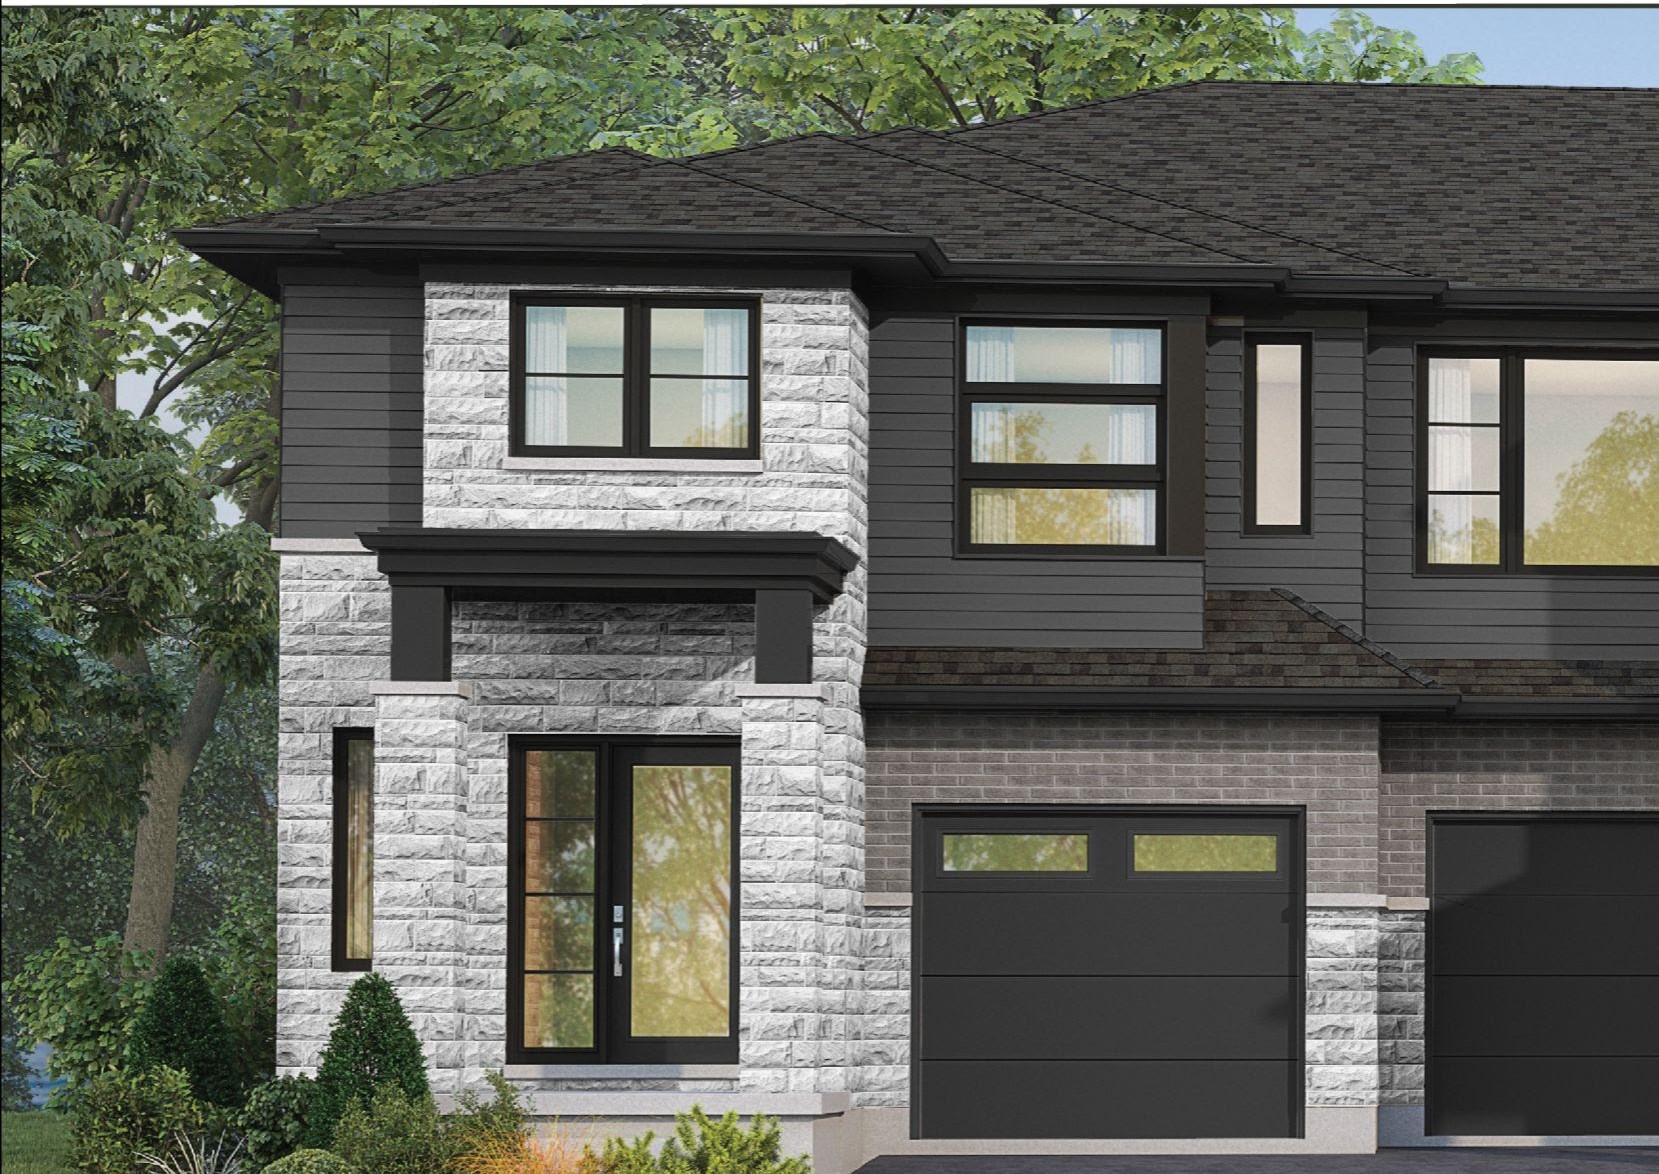 Modern two-story house with stone accents and garage.